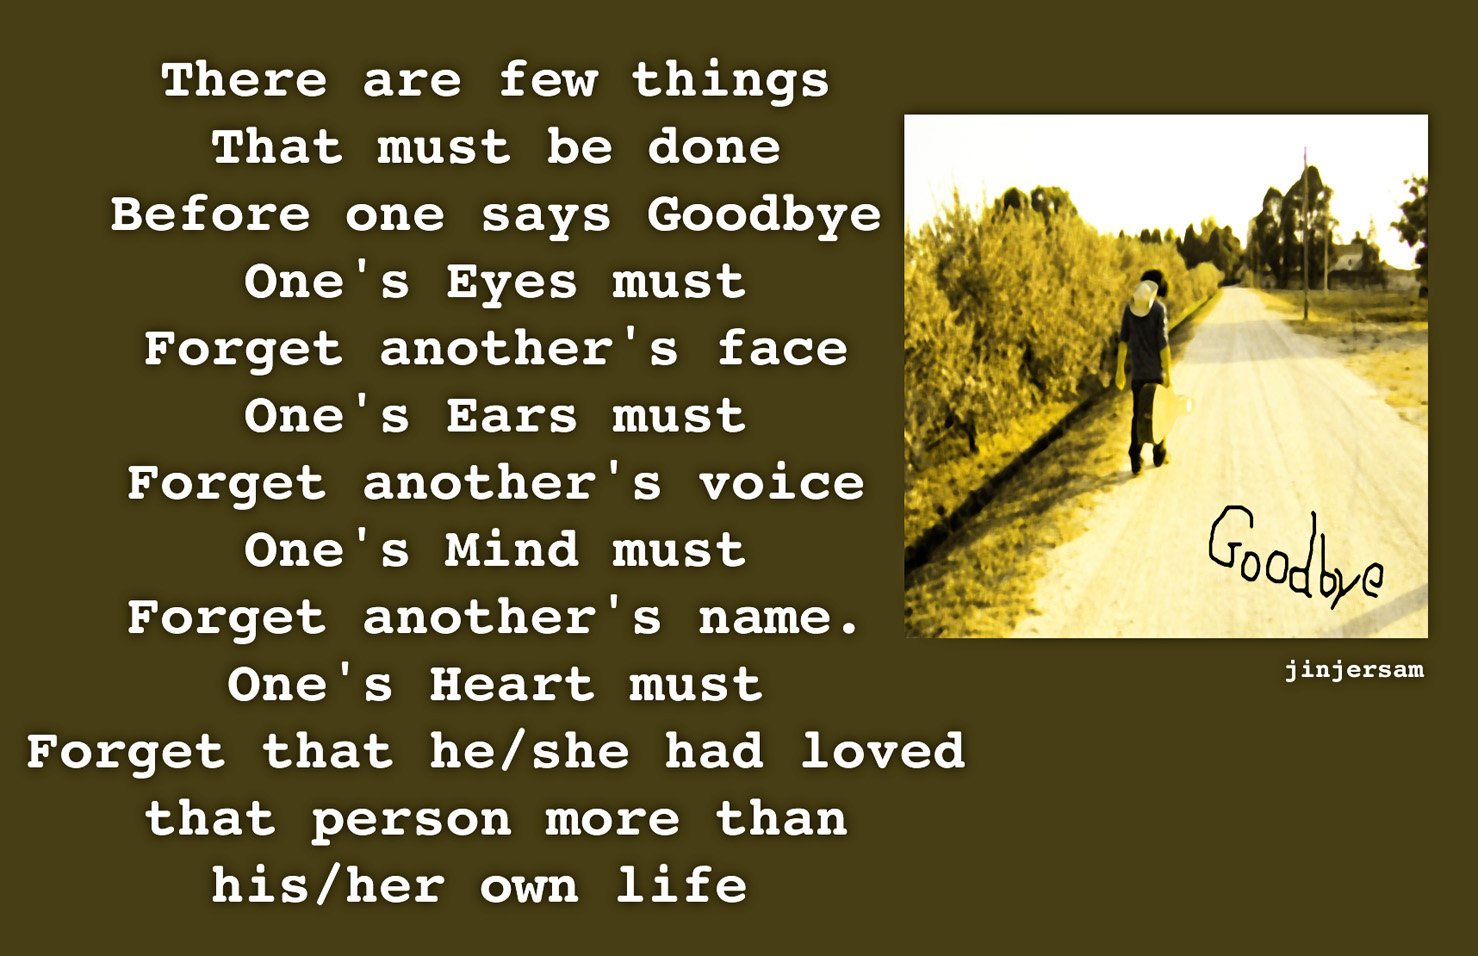 Goodbye quotes jasreflections page